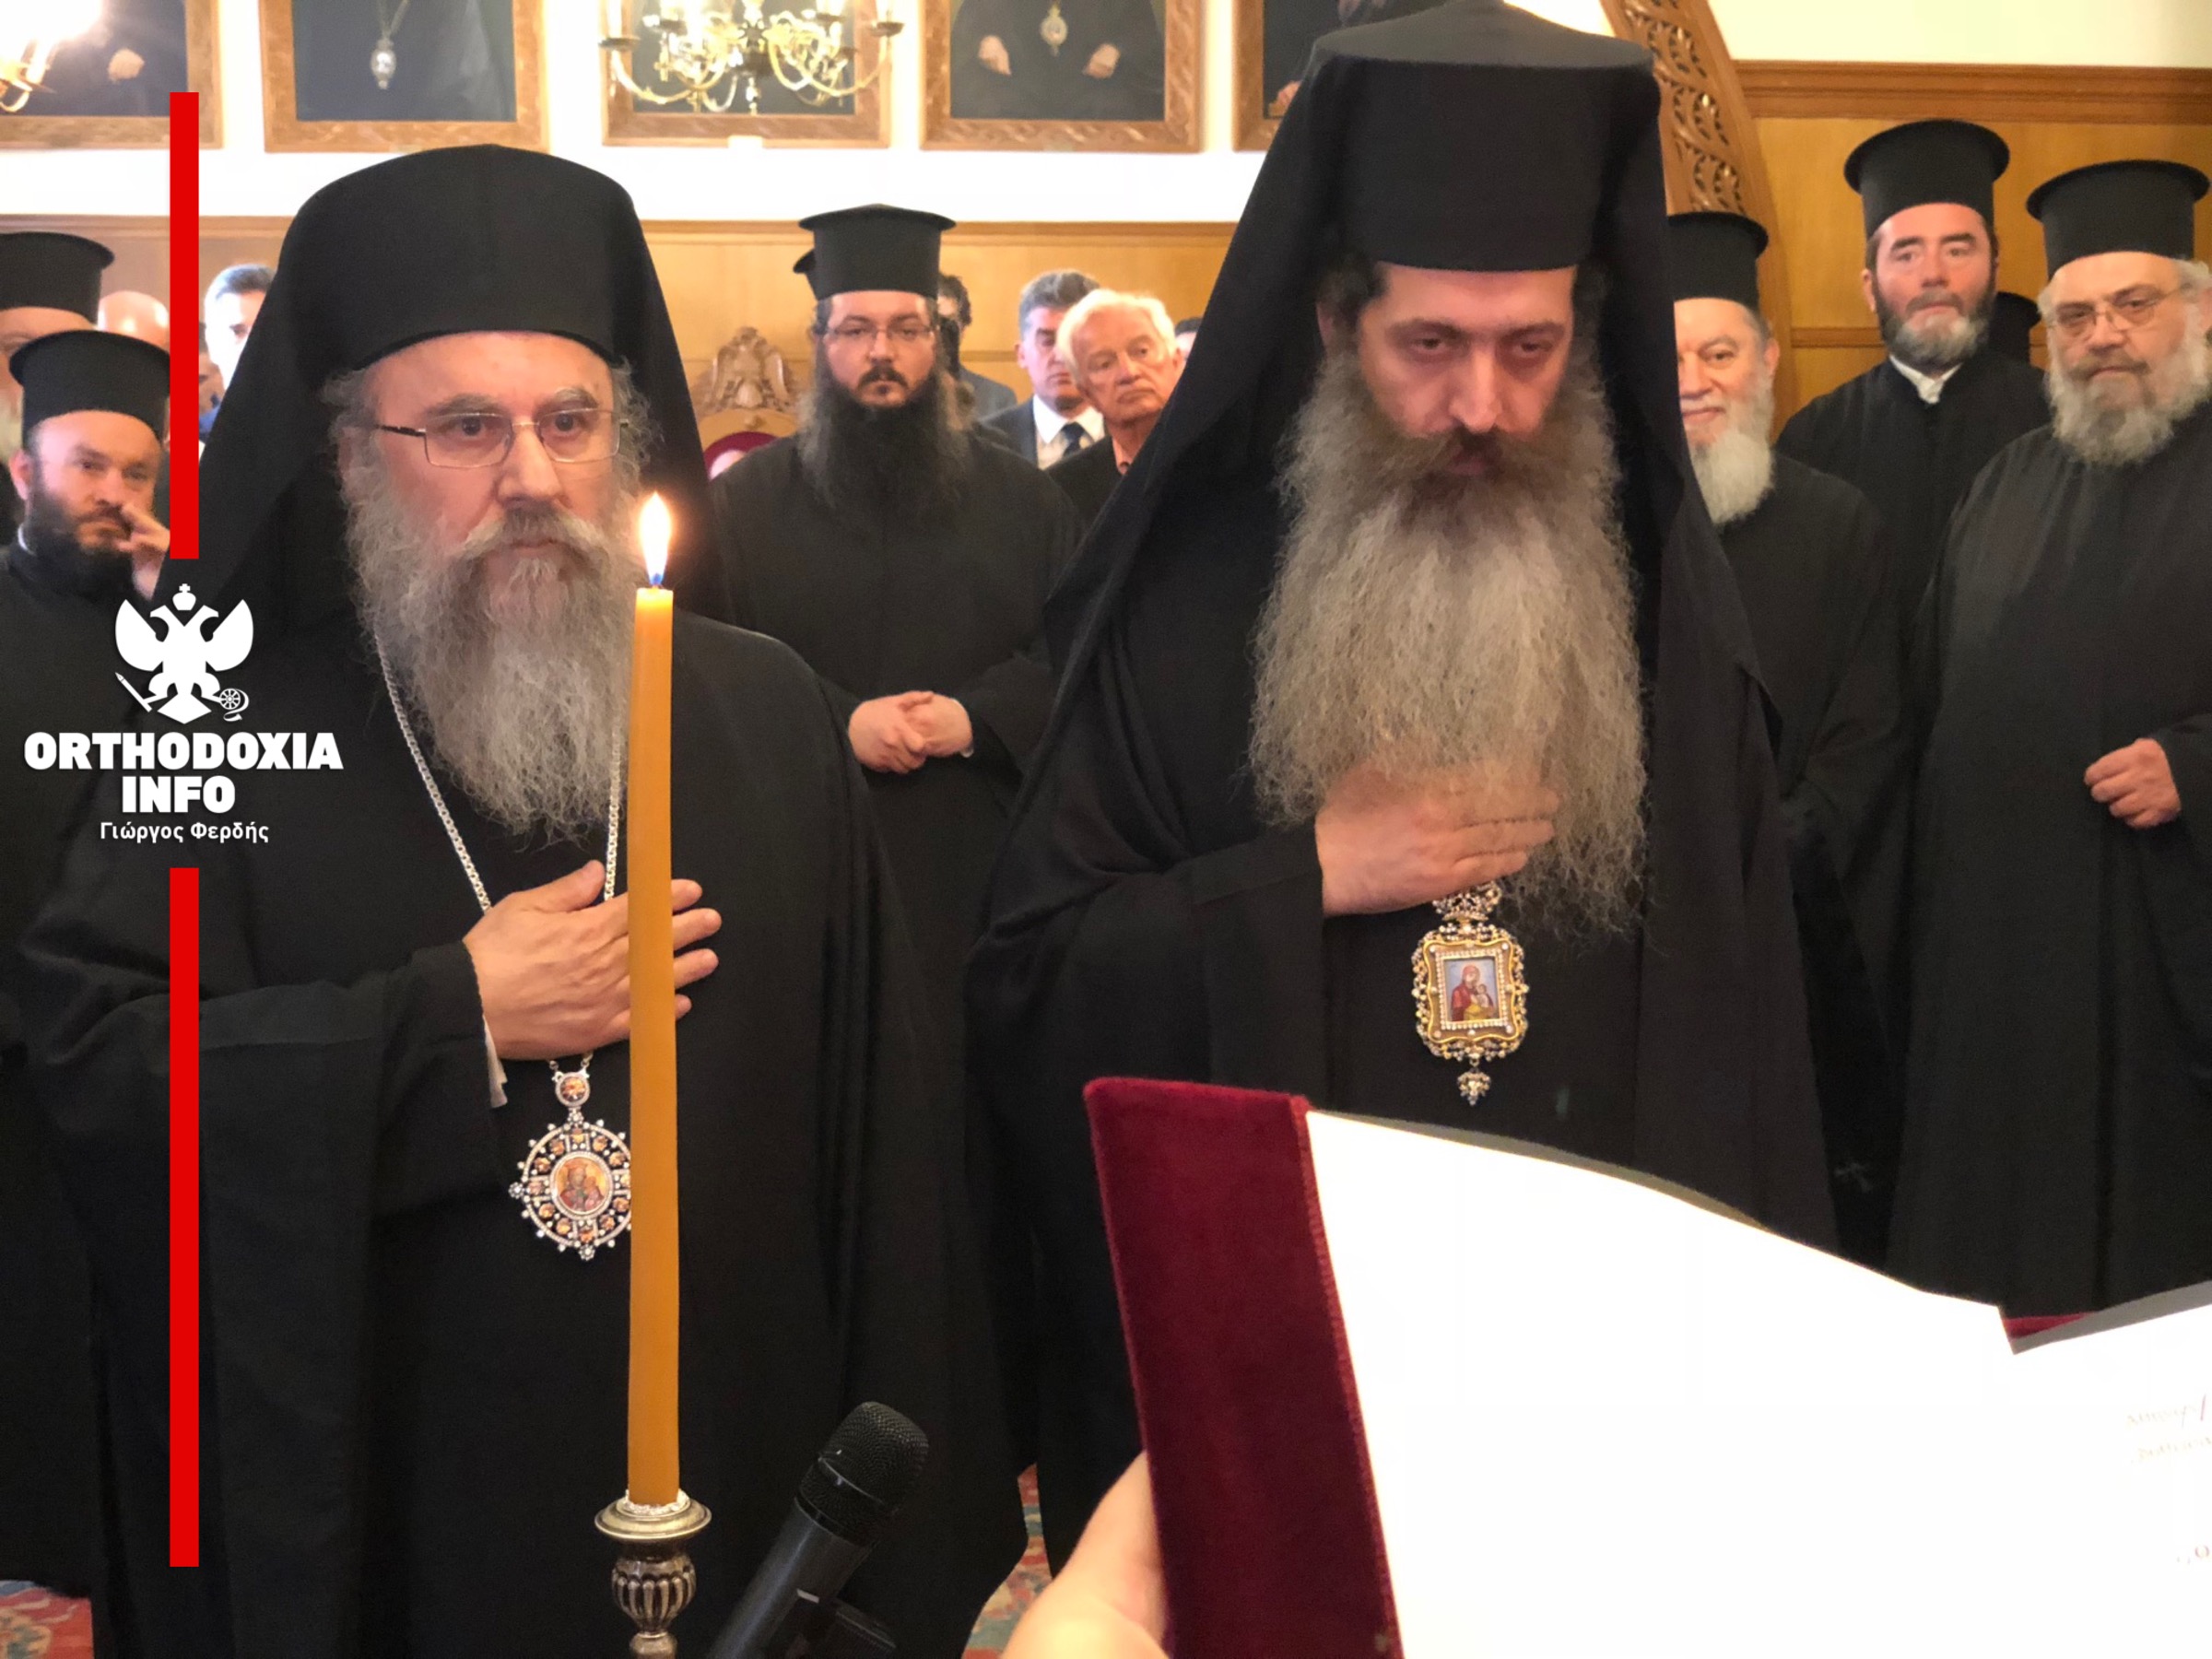 https://orthodoxia.info/news/wp-content/uploads/2018/03/dieveveoseis_voithon_21.jpg